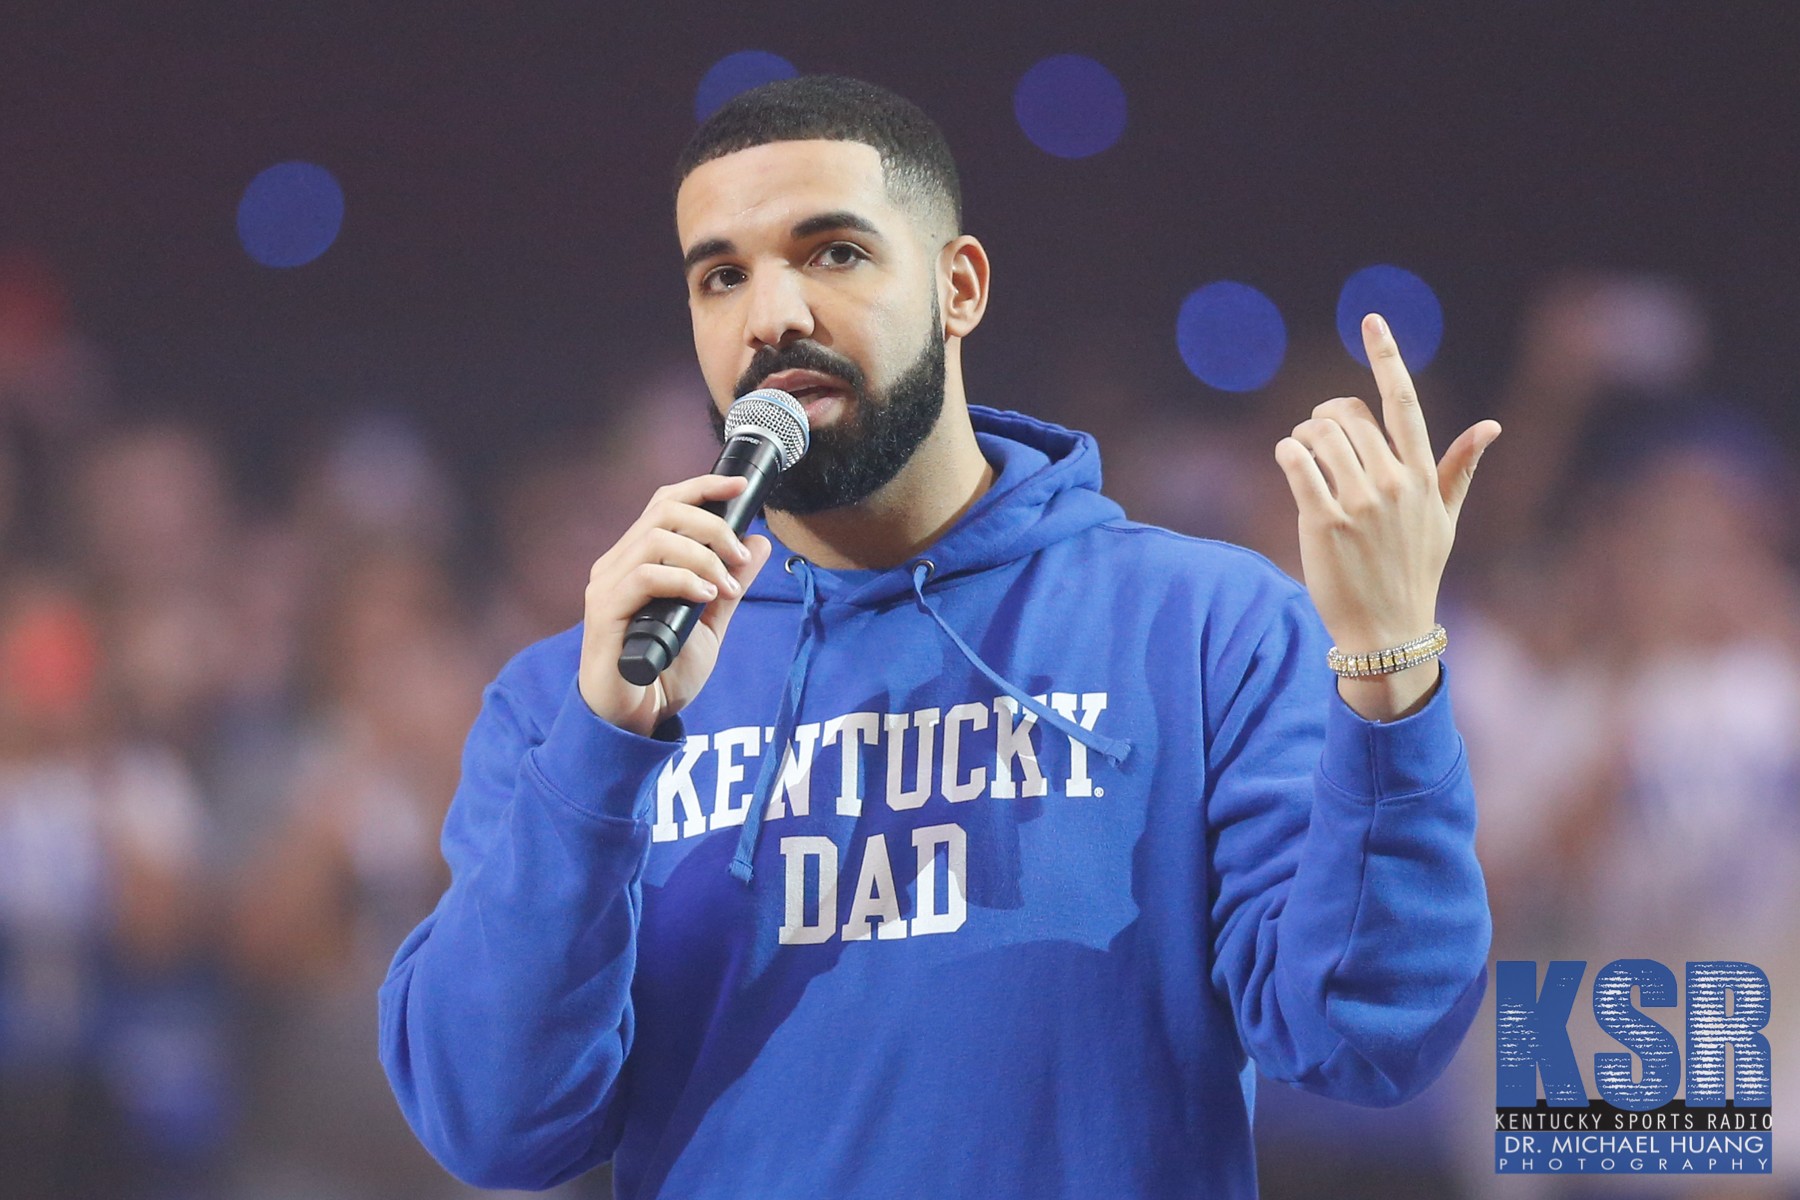 Outside the Lines needs to watch itself with the Kentucky/Drake talk